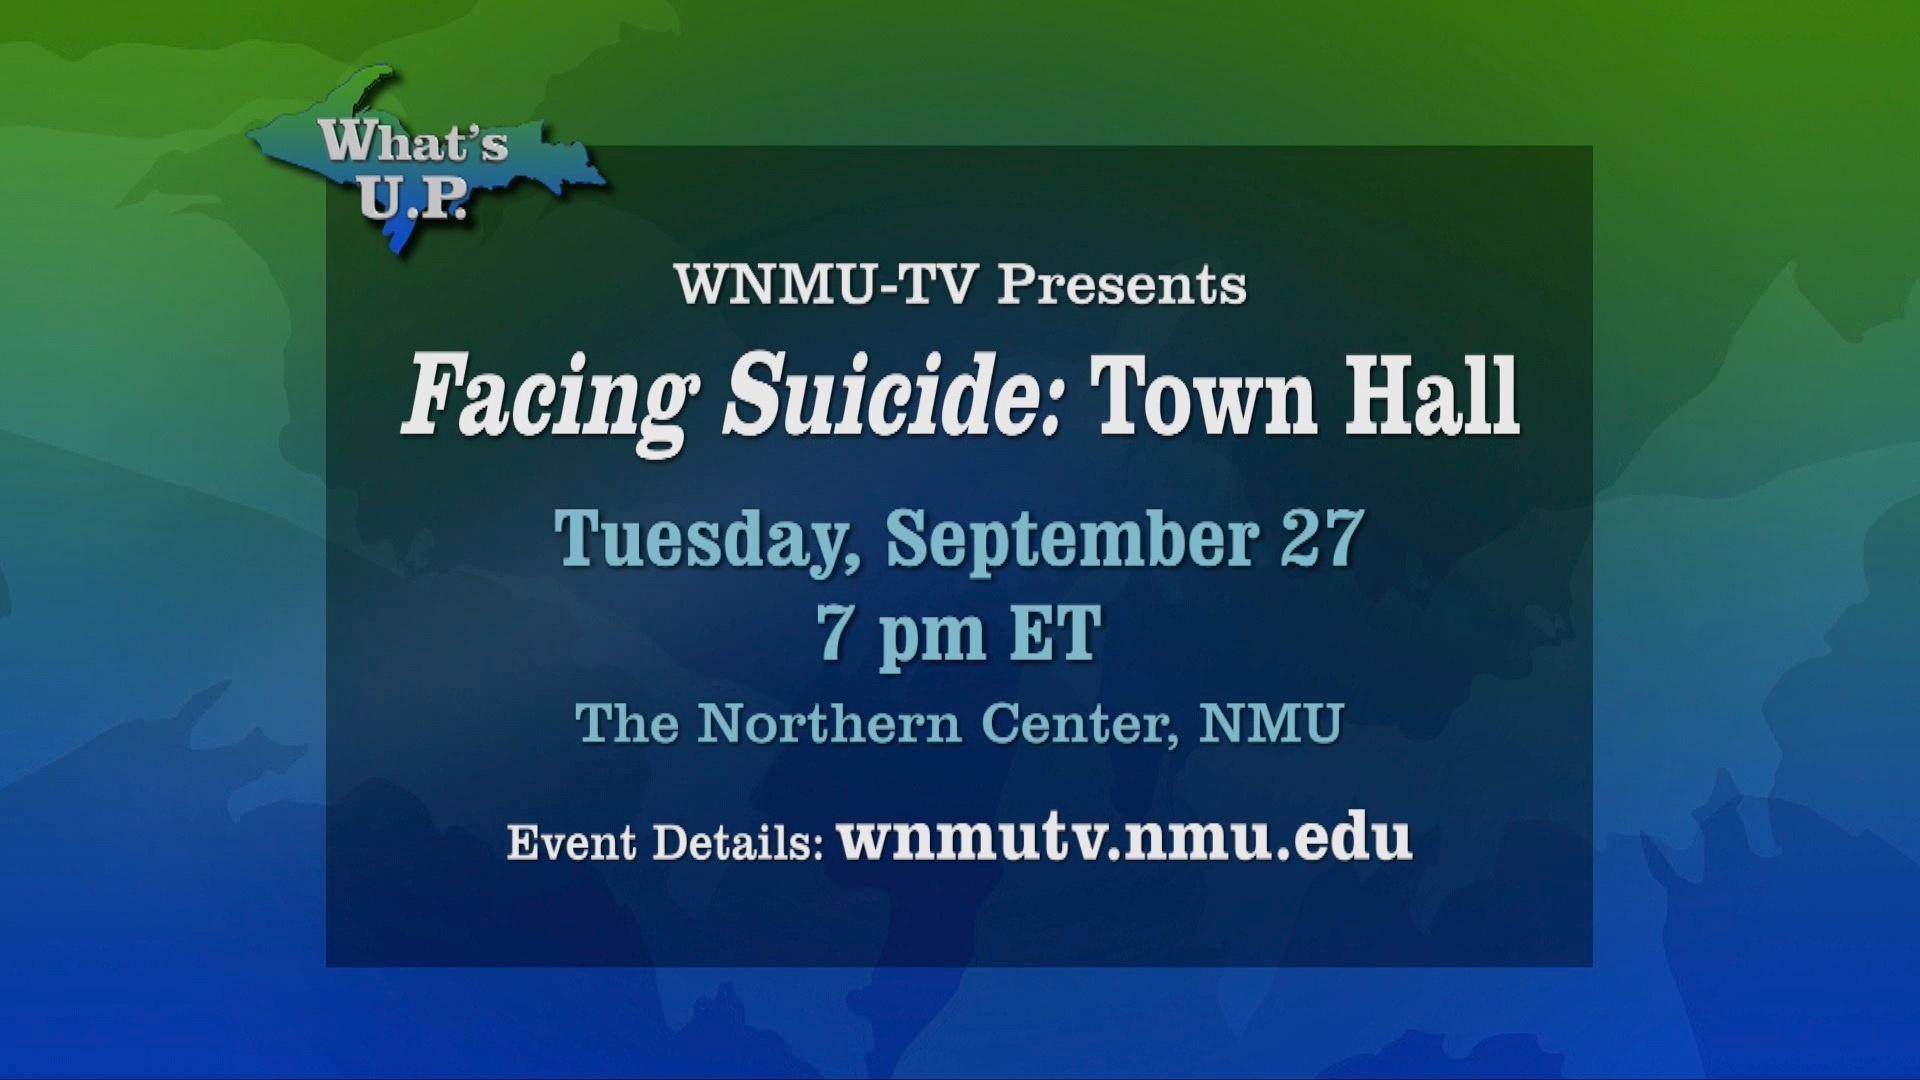 Facing Suicide: Town Hall